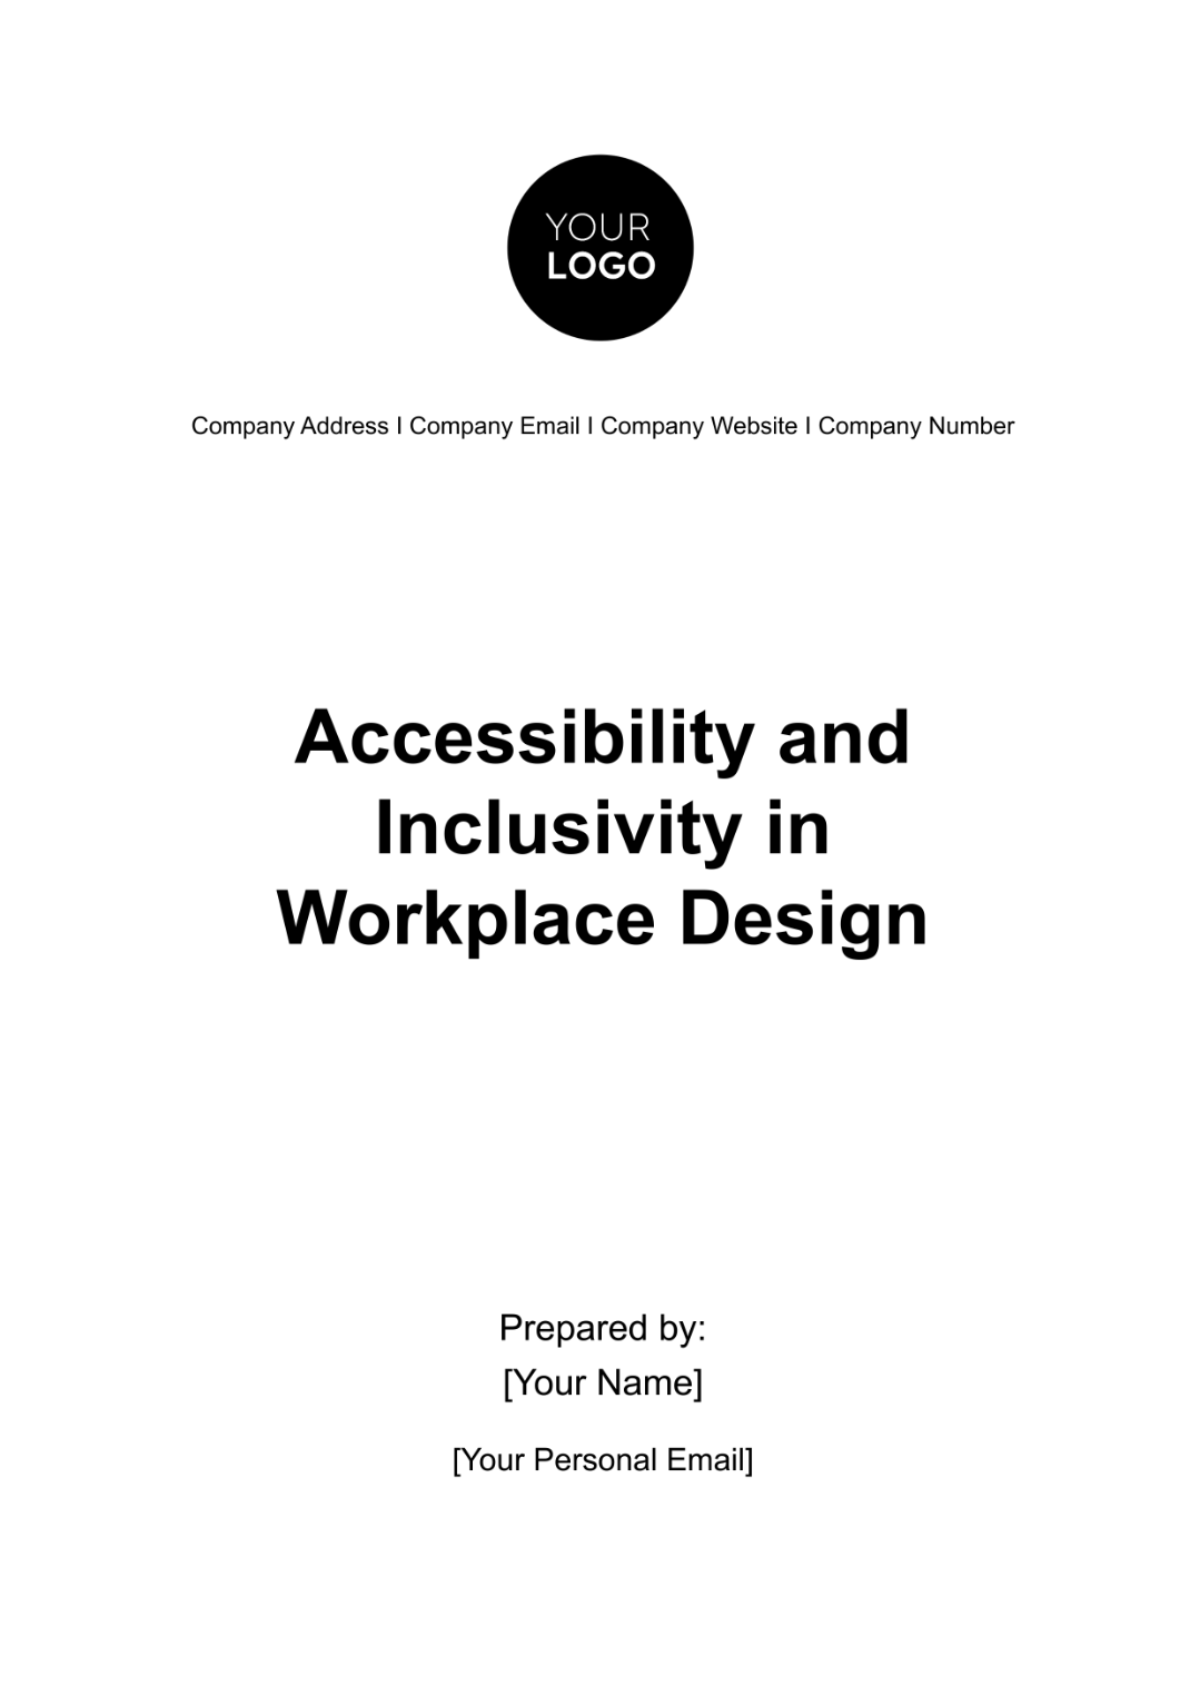 Free Accessibility and Inclusivity in Workplace Design HR Template